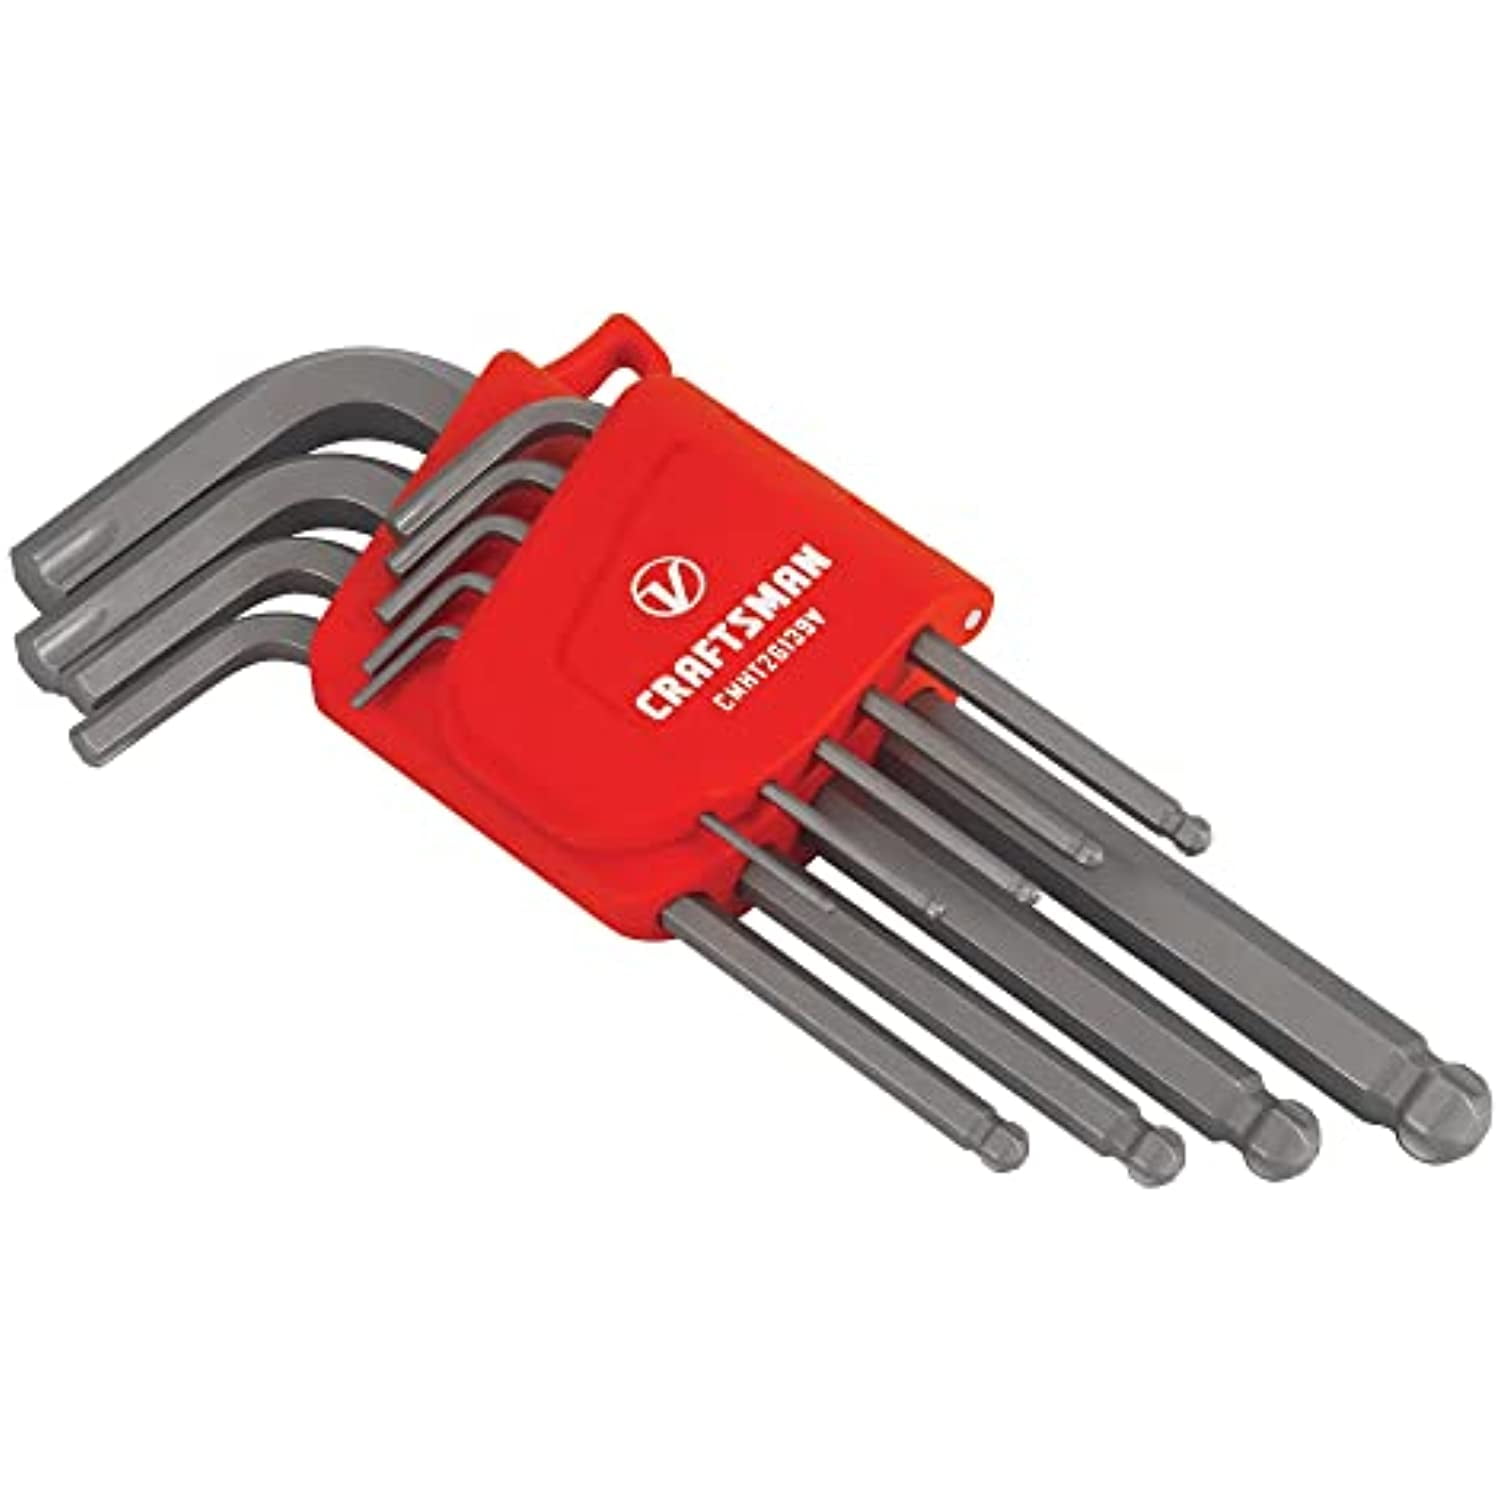 Craftsman 9-46274 Standard and Metric Ball End Hex Key Sets 26-Piece 